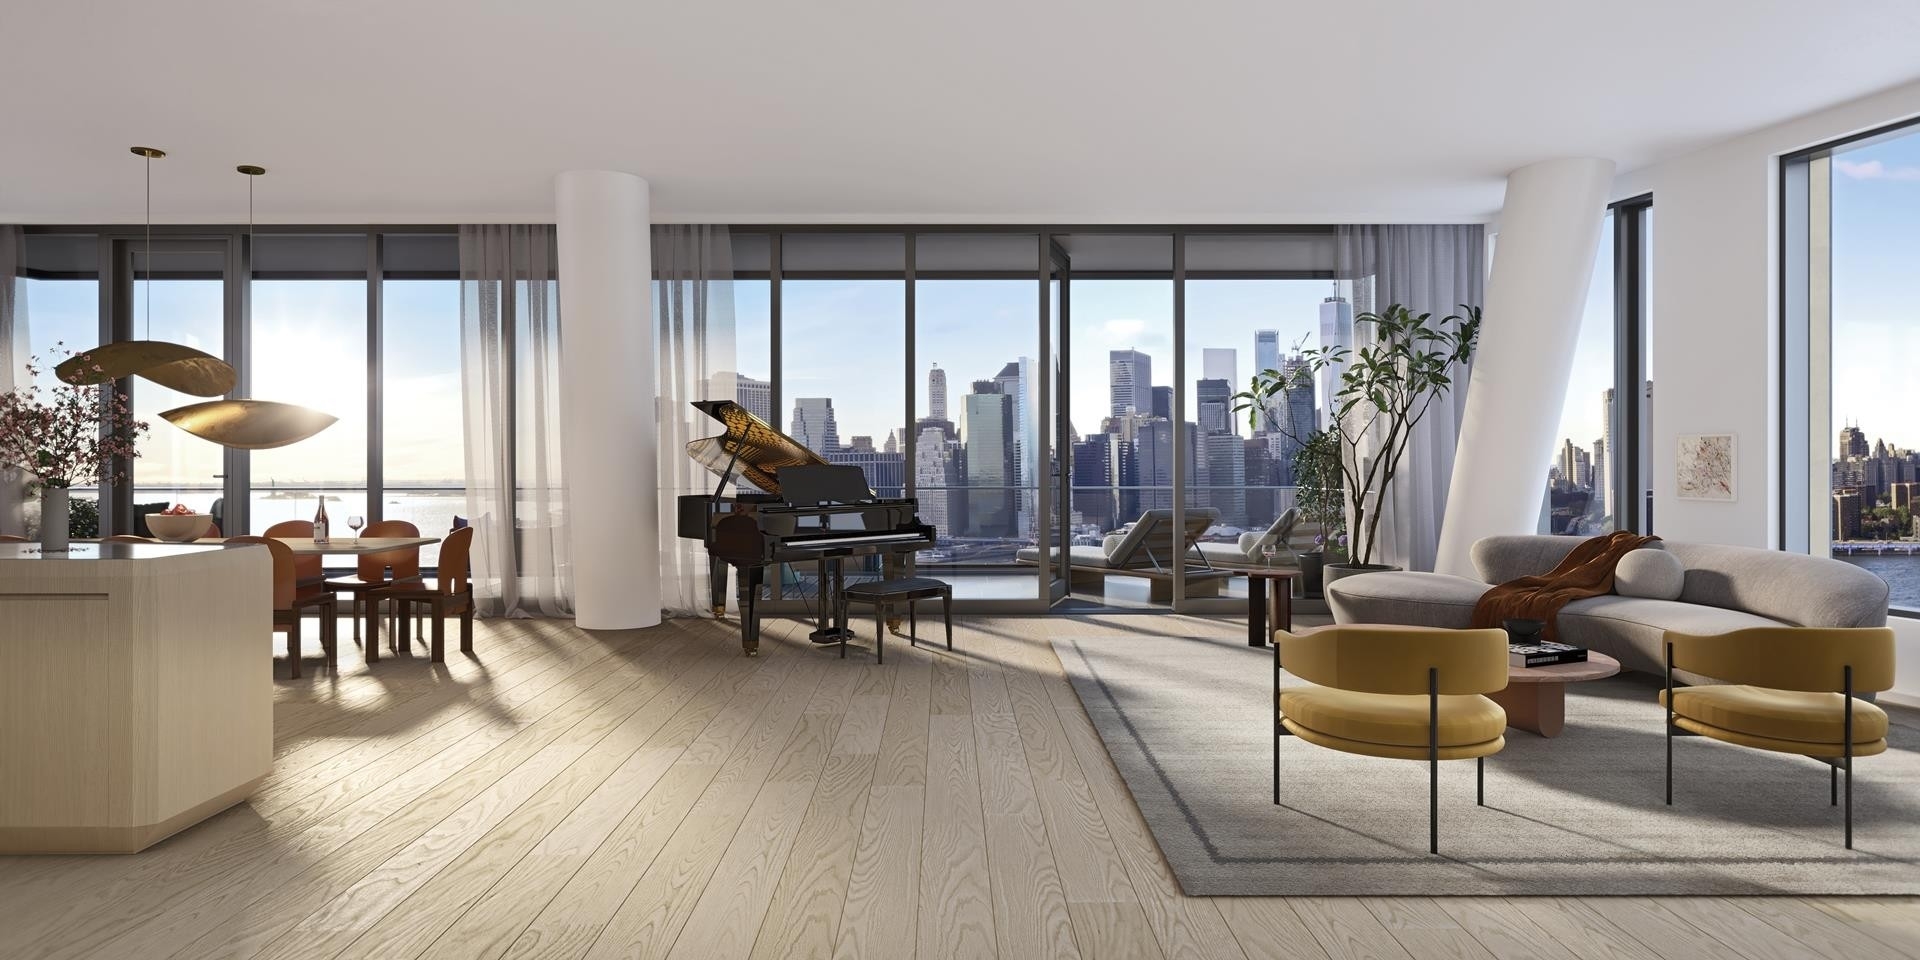 Condominium for Sale at Olympia Dumbo, 30 FRONT ST, 29A Brooklyn, New York 11201